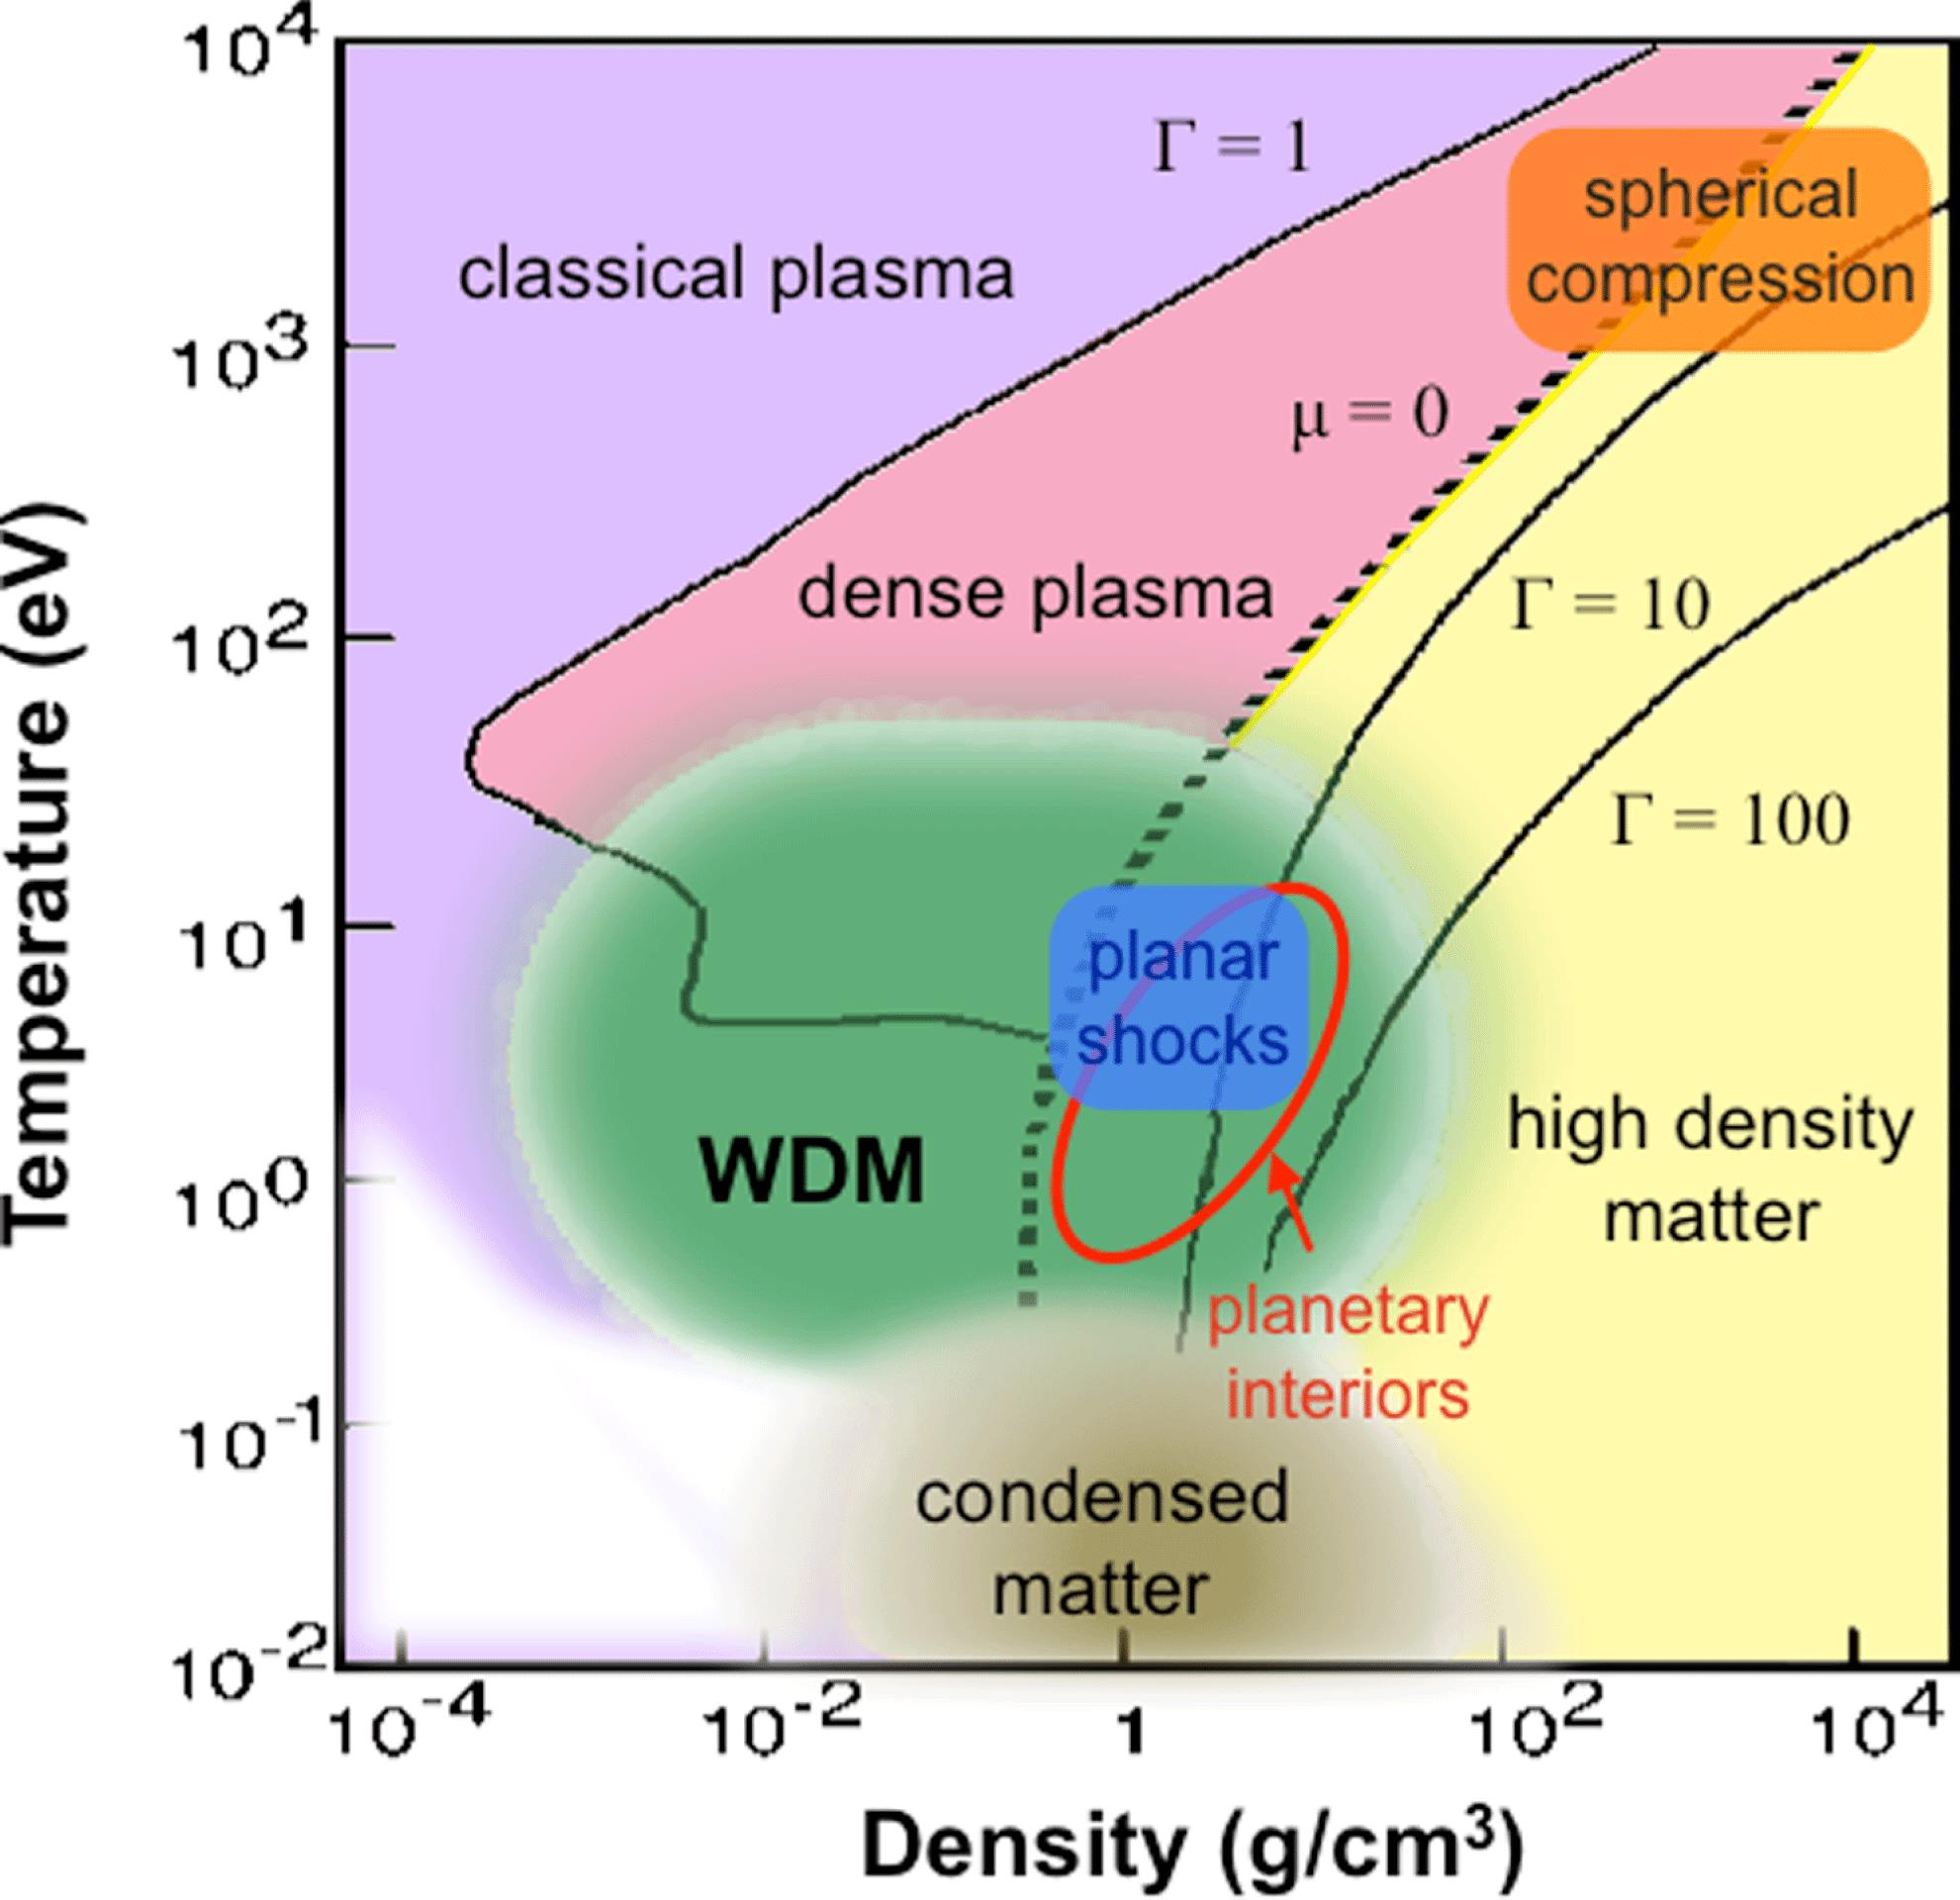 Phase diagram for the WDM regime. WDM lies between condensed matter, hot dense matter and ideal plasma (low densities), and overlaps the planar laser-generated shocks in matter as well as the astrophysical conditions. $\unicode[STIX]{x1D6E4}$ is the coupling parameter (ratio of Coulomb and thermal energy) so the $\unicode[STIX]{x1D6E4}=1$ line separates the strongly and weakly coupled regimes, and $\unicode[STIX]{x1D707}$ stands for the chemical potential where the $\unicode[STIX]{x1D707}=0$ line signifies the area where the Fermi energy equals $k_{B}T$, below which we get Fermi degenerate matter.